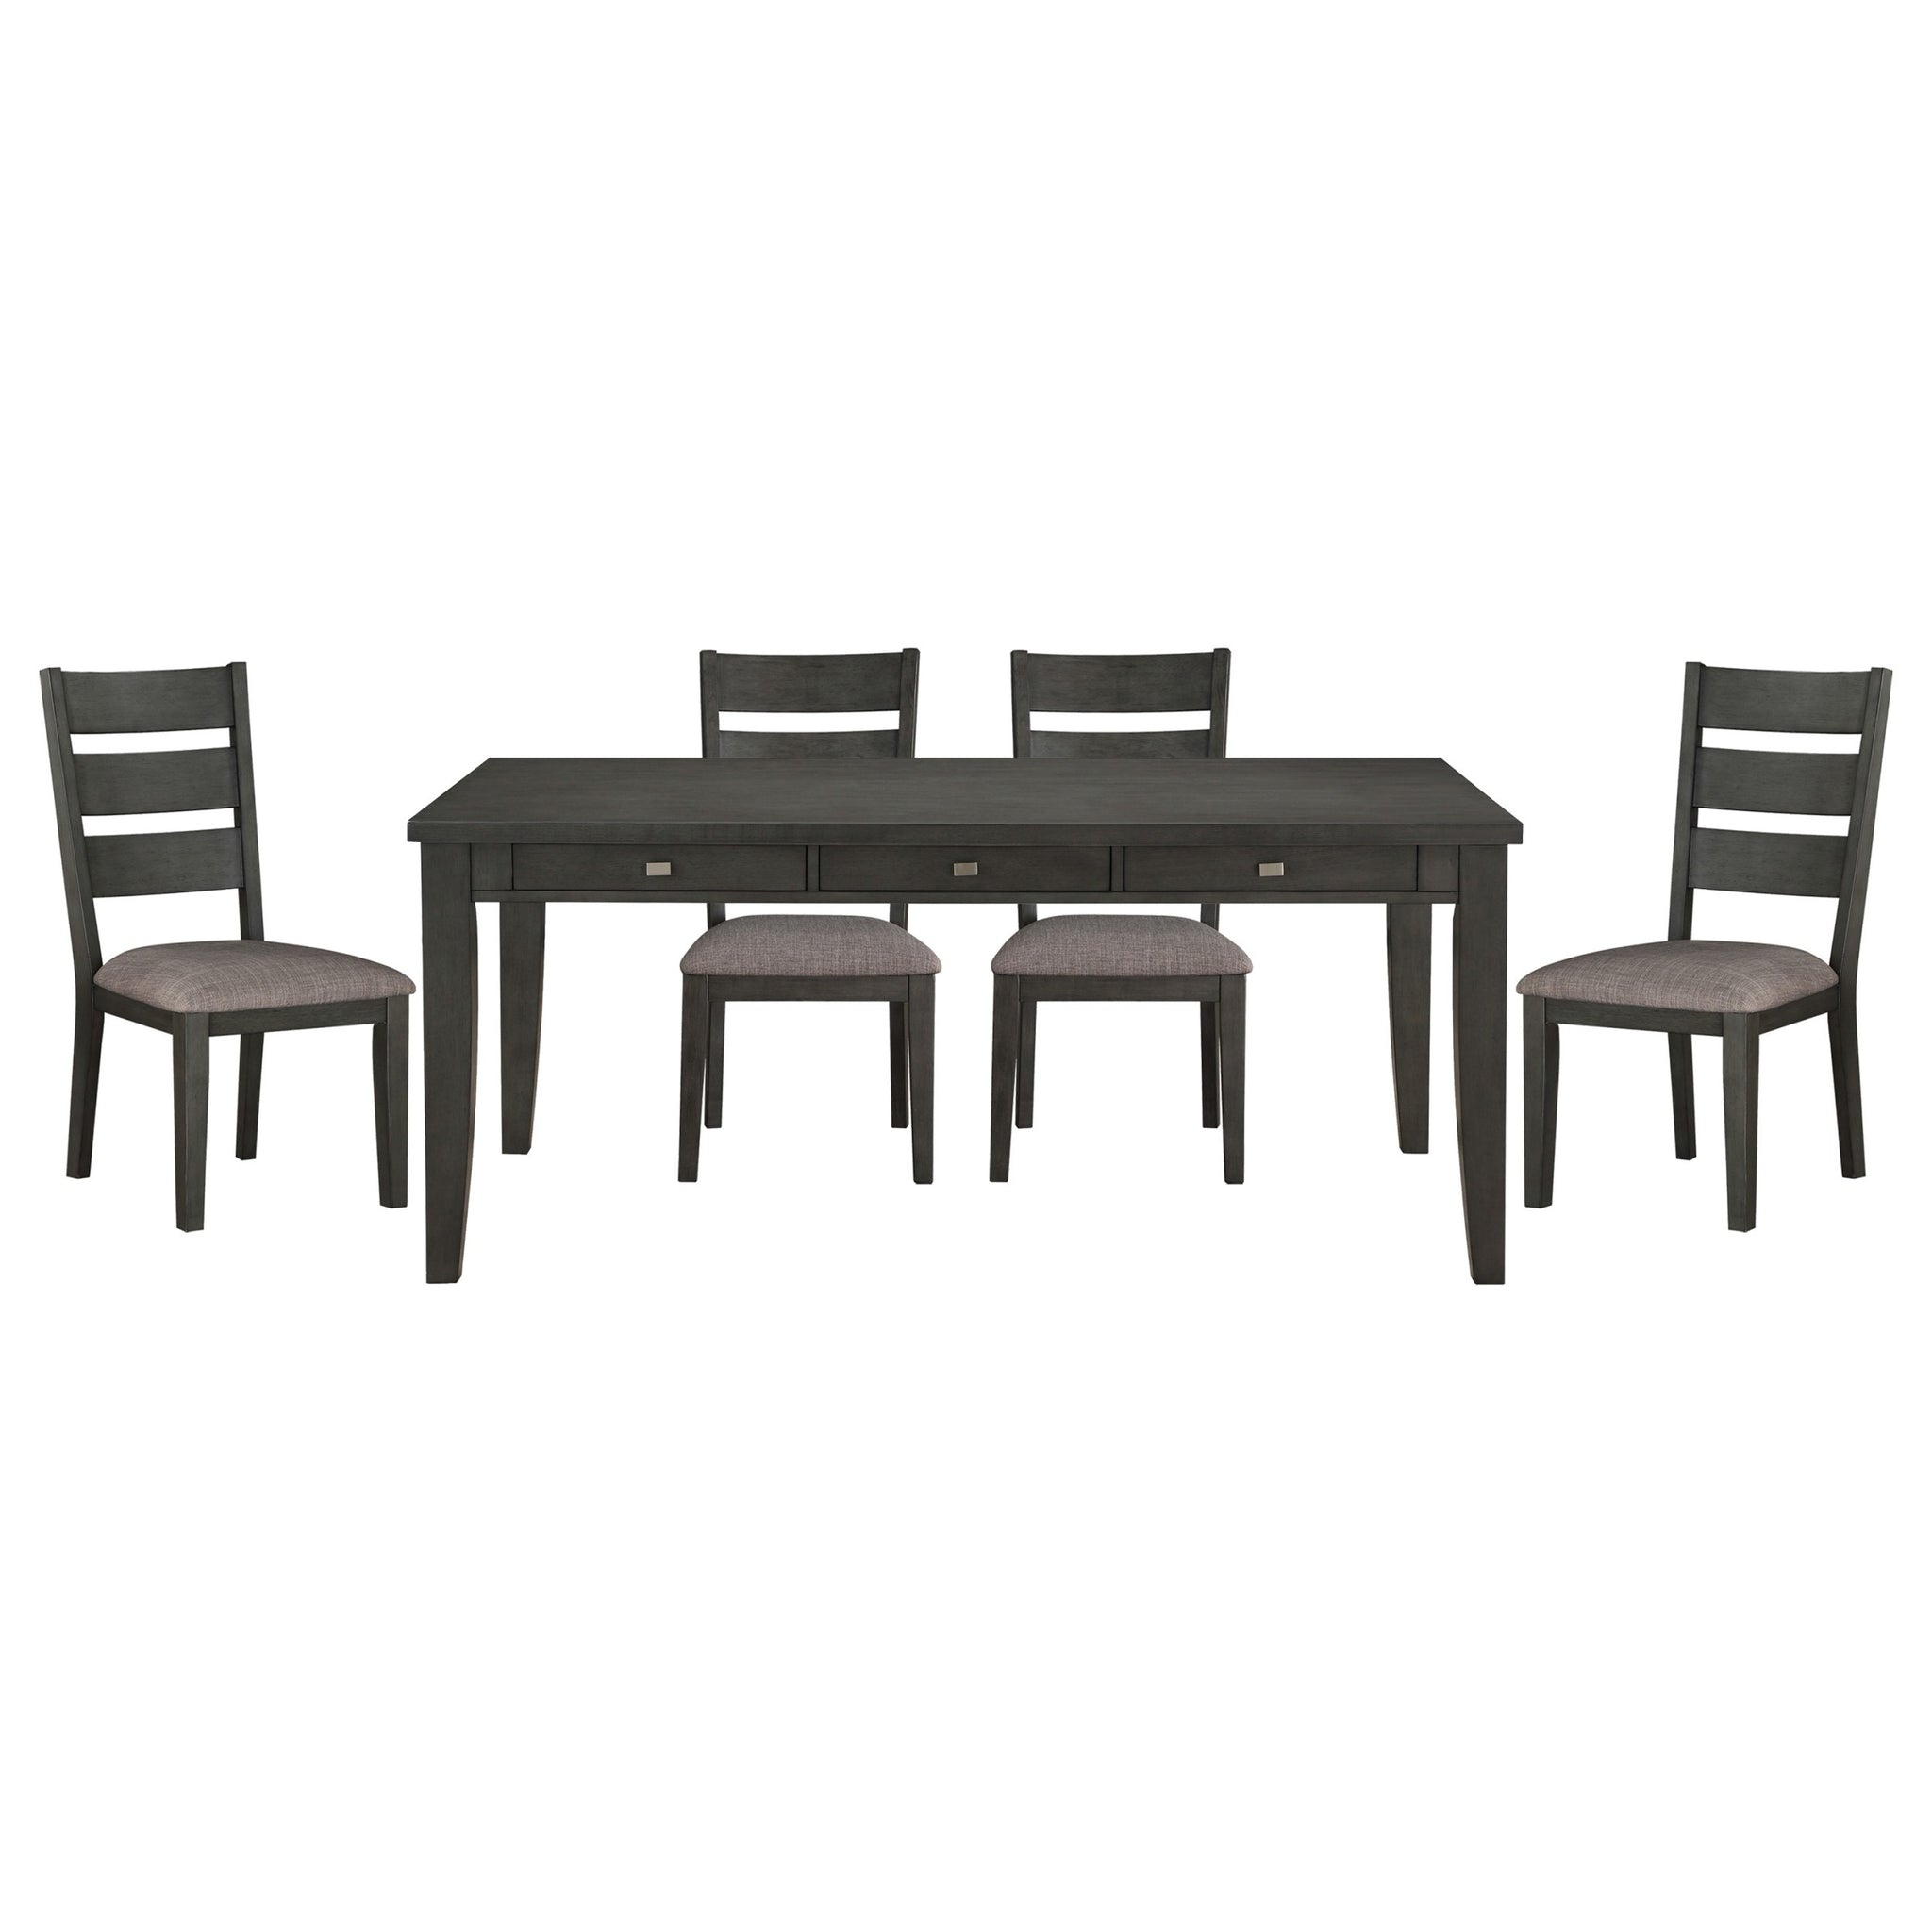 Gray Finish 5pc Dining Set Table with 6x Drawers and wood-wood-gray-seats 4-wood-dining